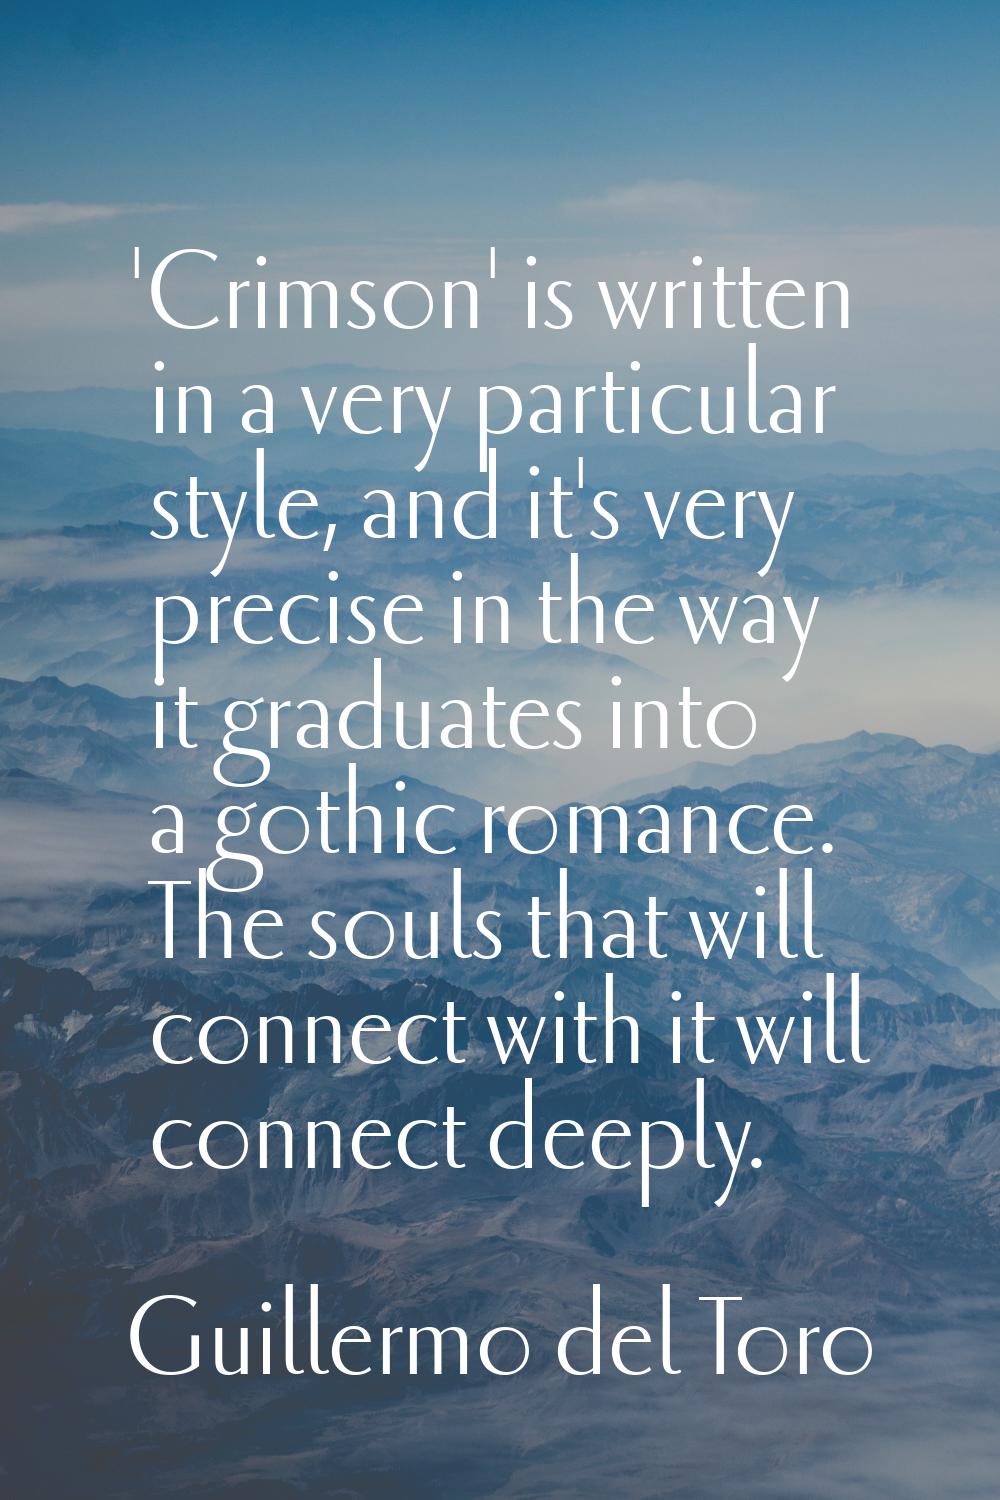 'Crimson' is written in a very particular style, and it's very precise in the way it graduates into